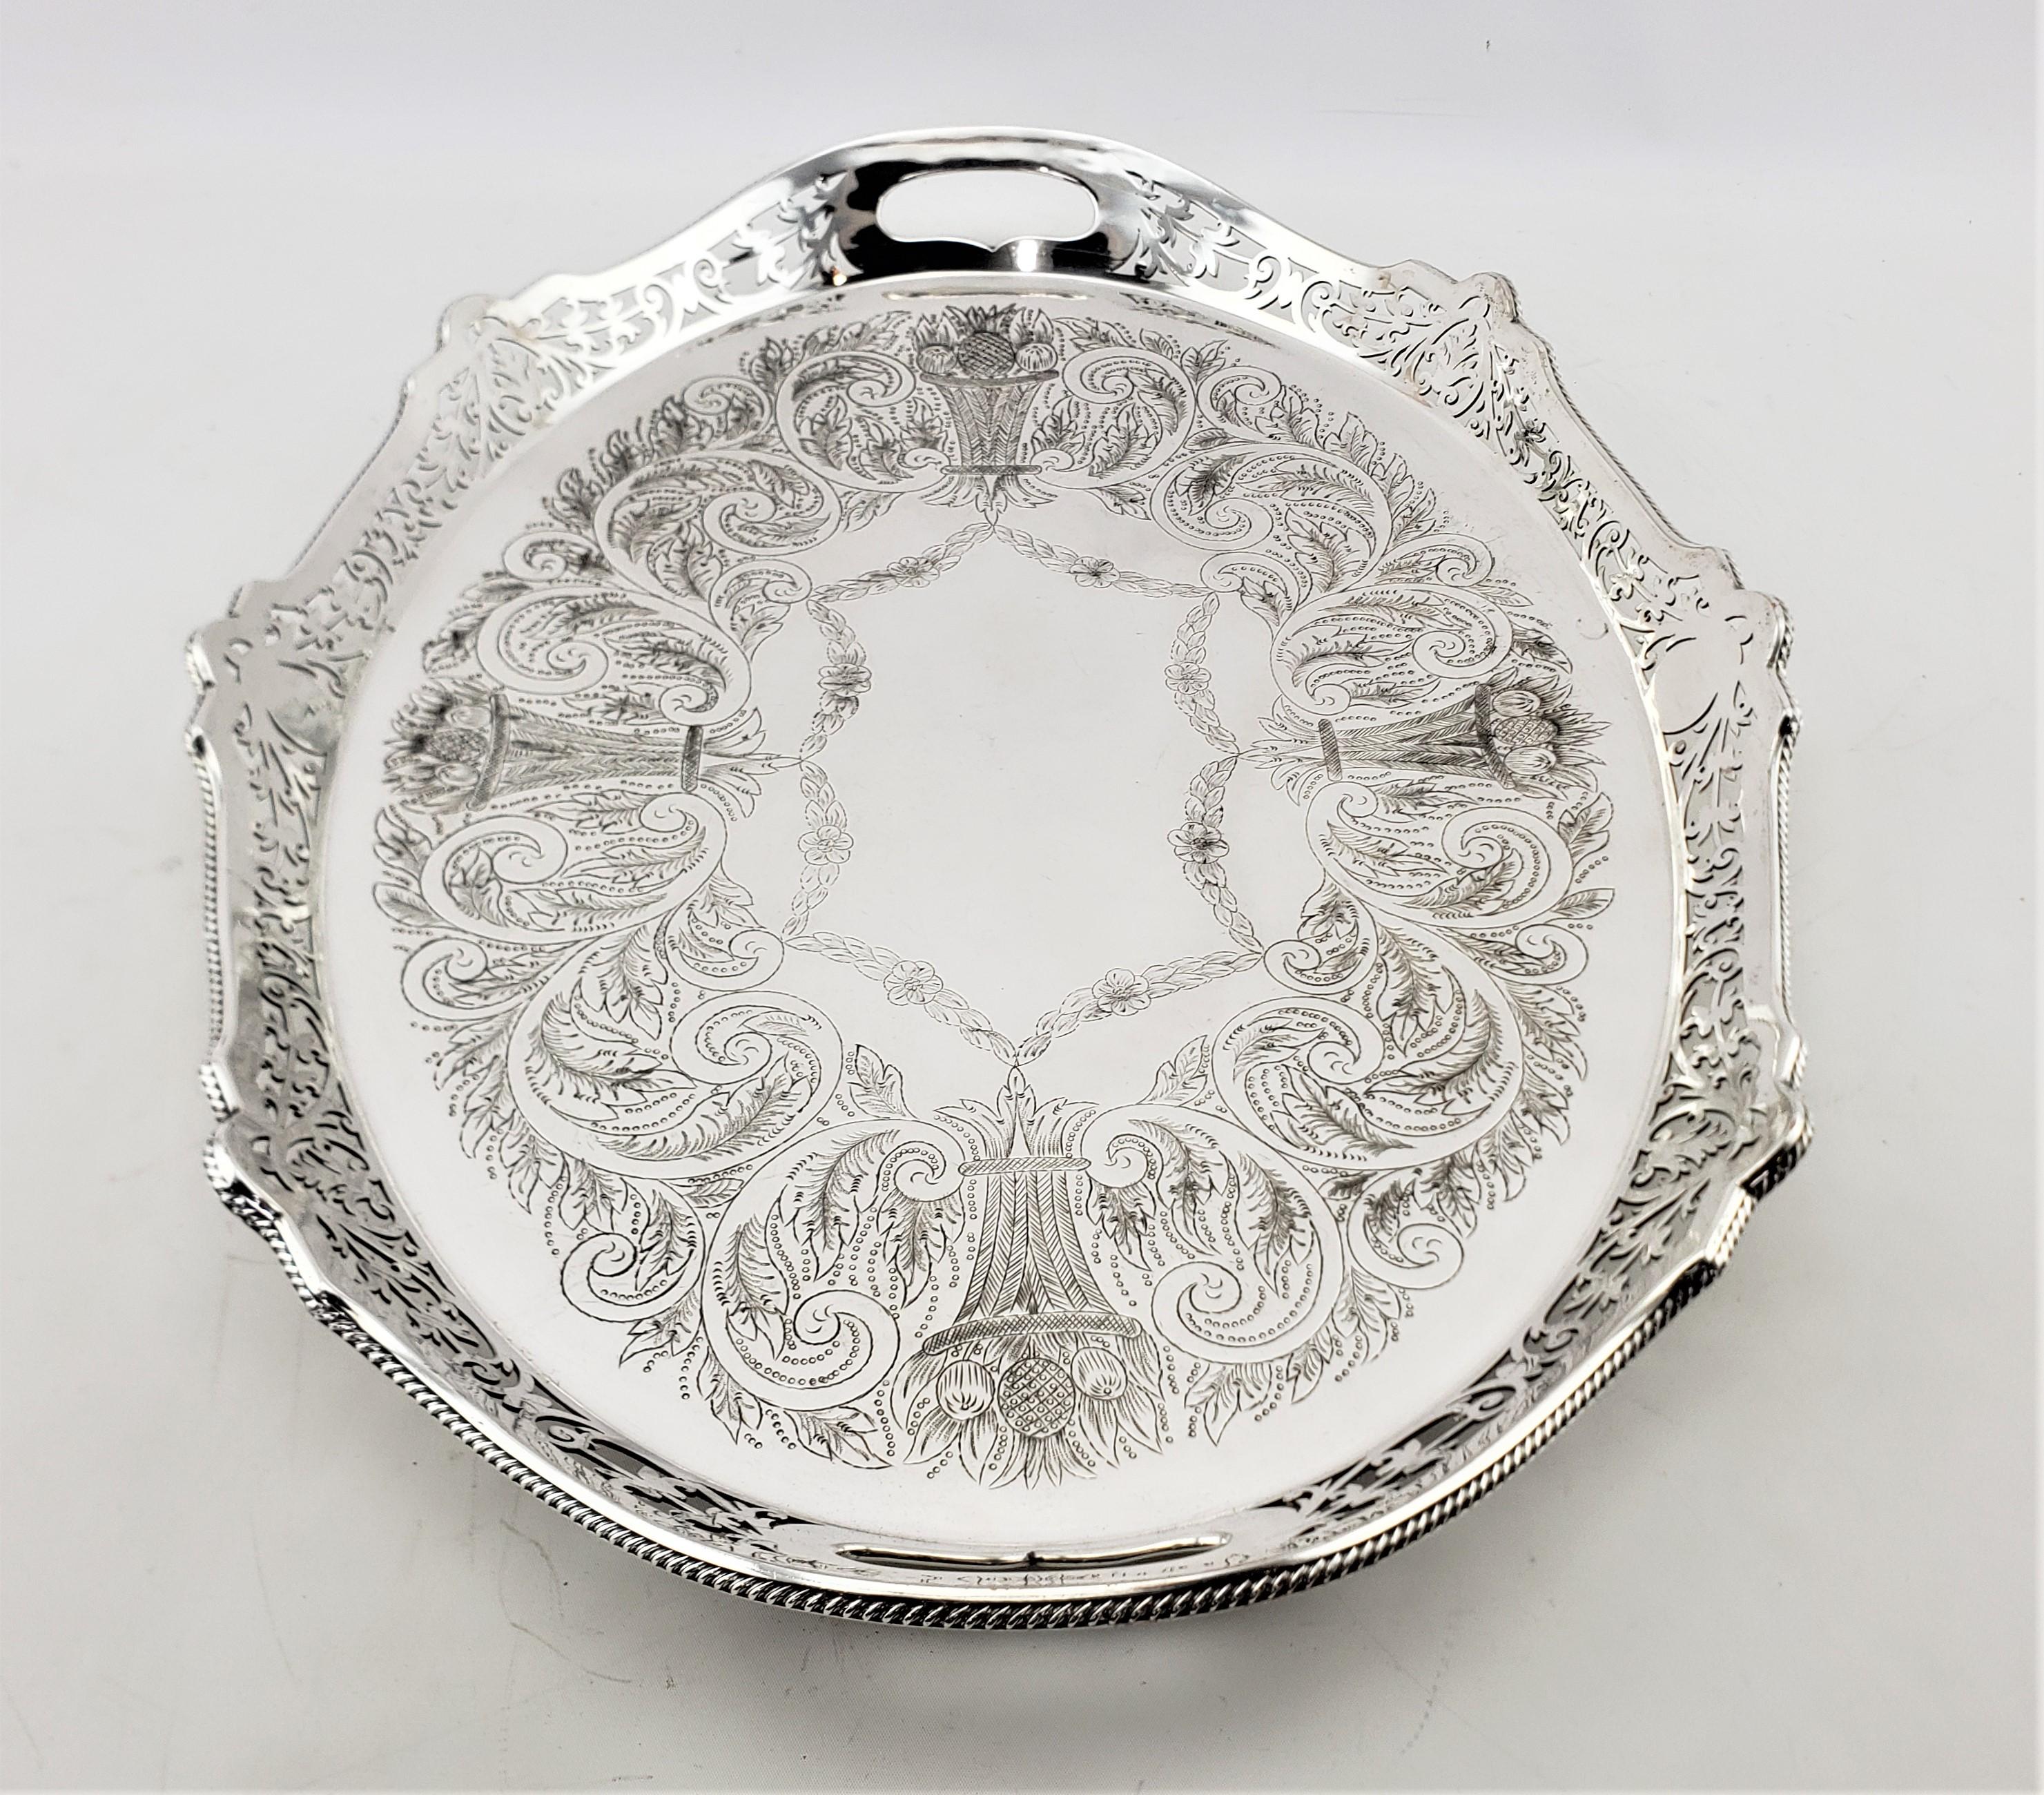 Antique Oval Silver Plated Gallery Serving Tray with Pierced Floral Decoration For Sale 1